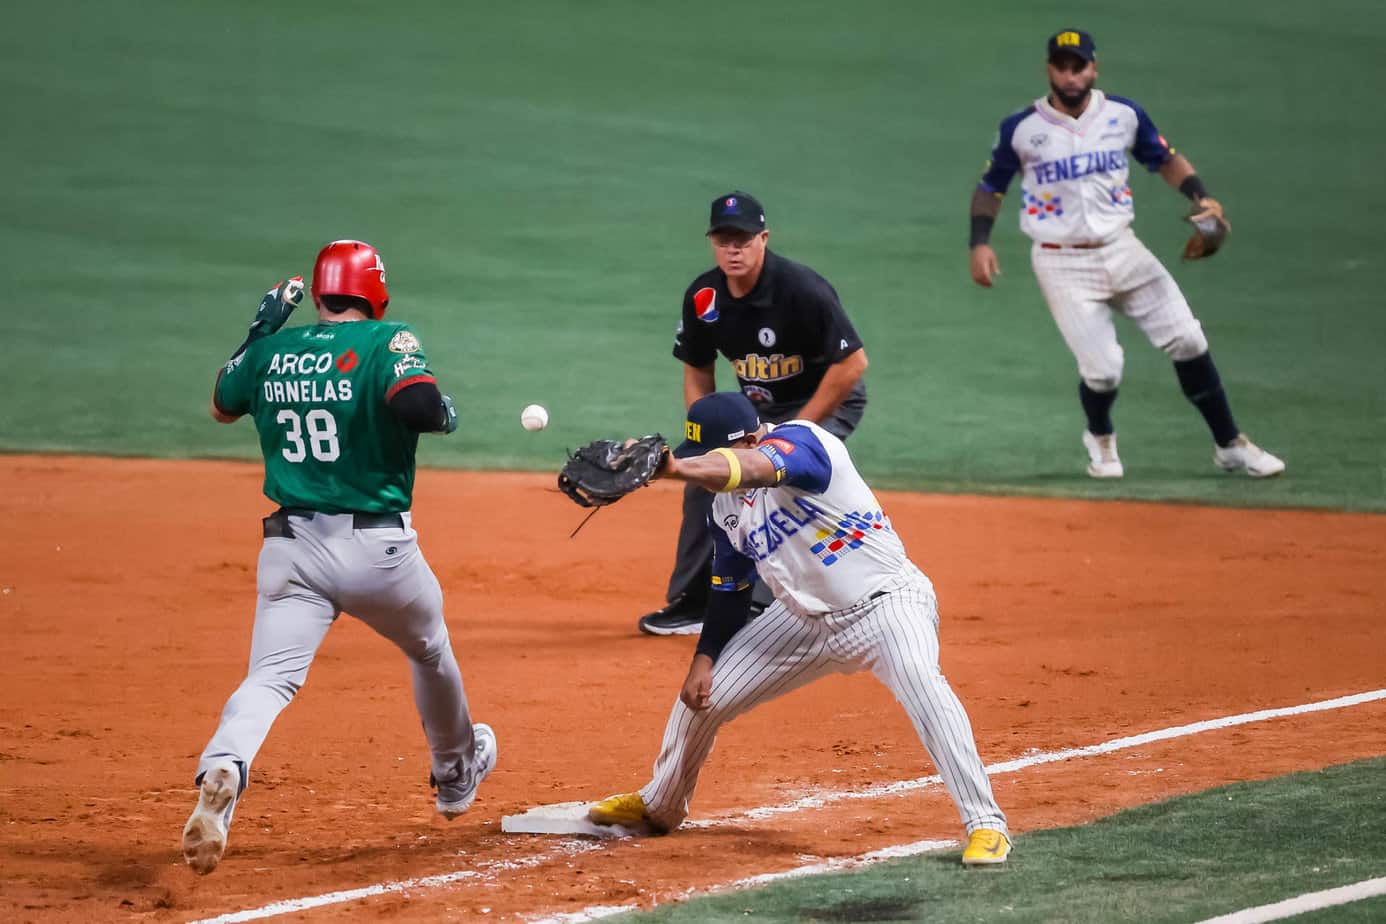 Serie del Caribe Sixth Matchday Preview